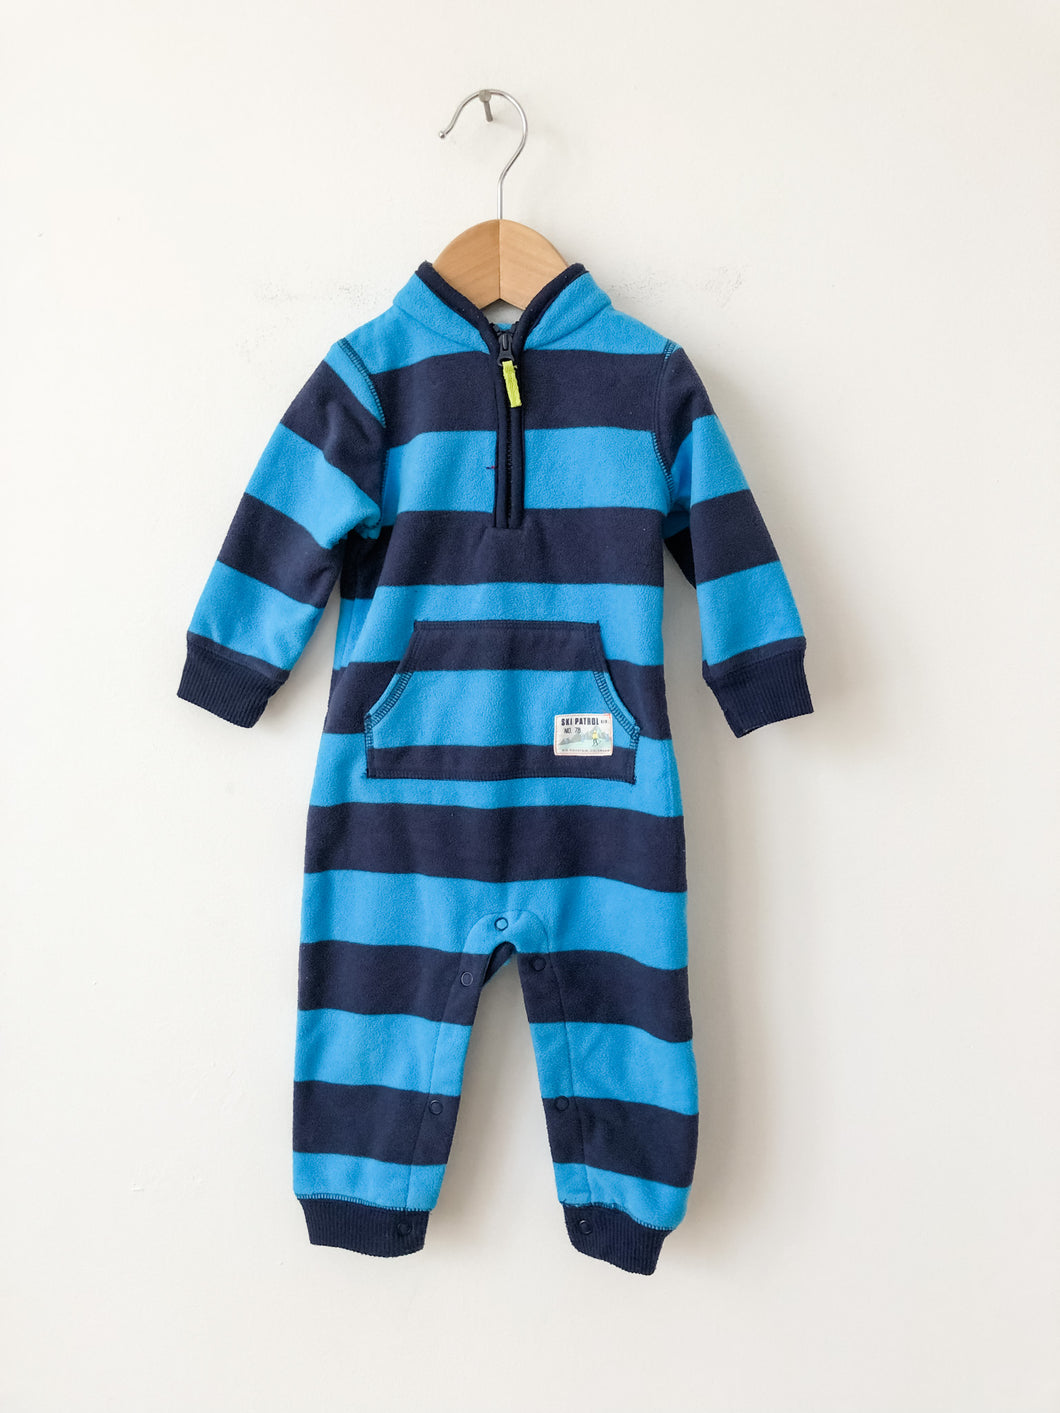 Boys Striped Carters Romper Size 9 Months